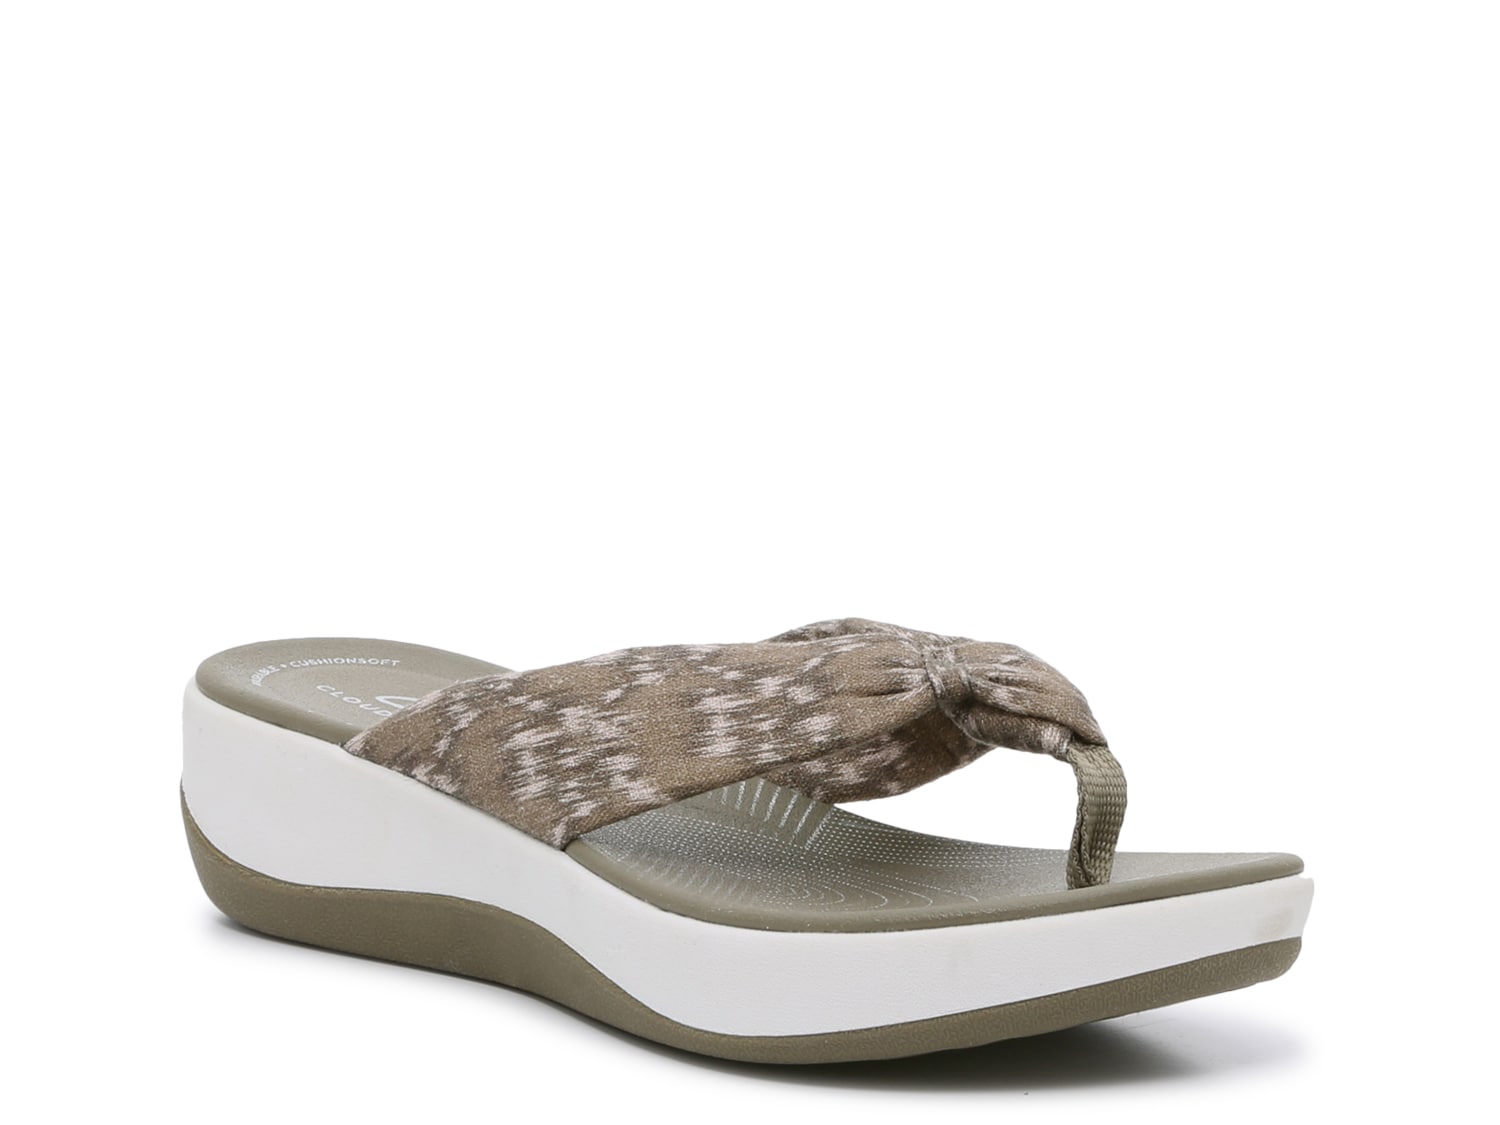 Clarks Cloudsteppers Arla Sandal - Free Shipping | DSW